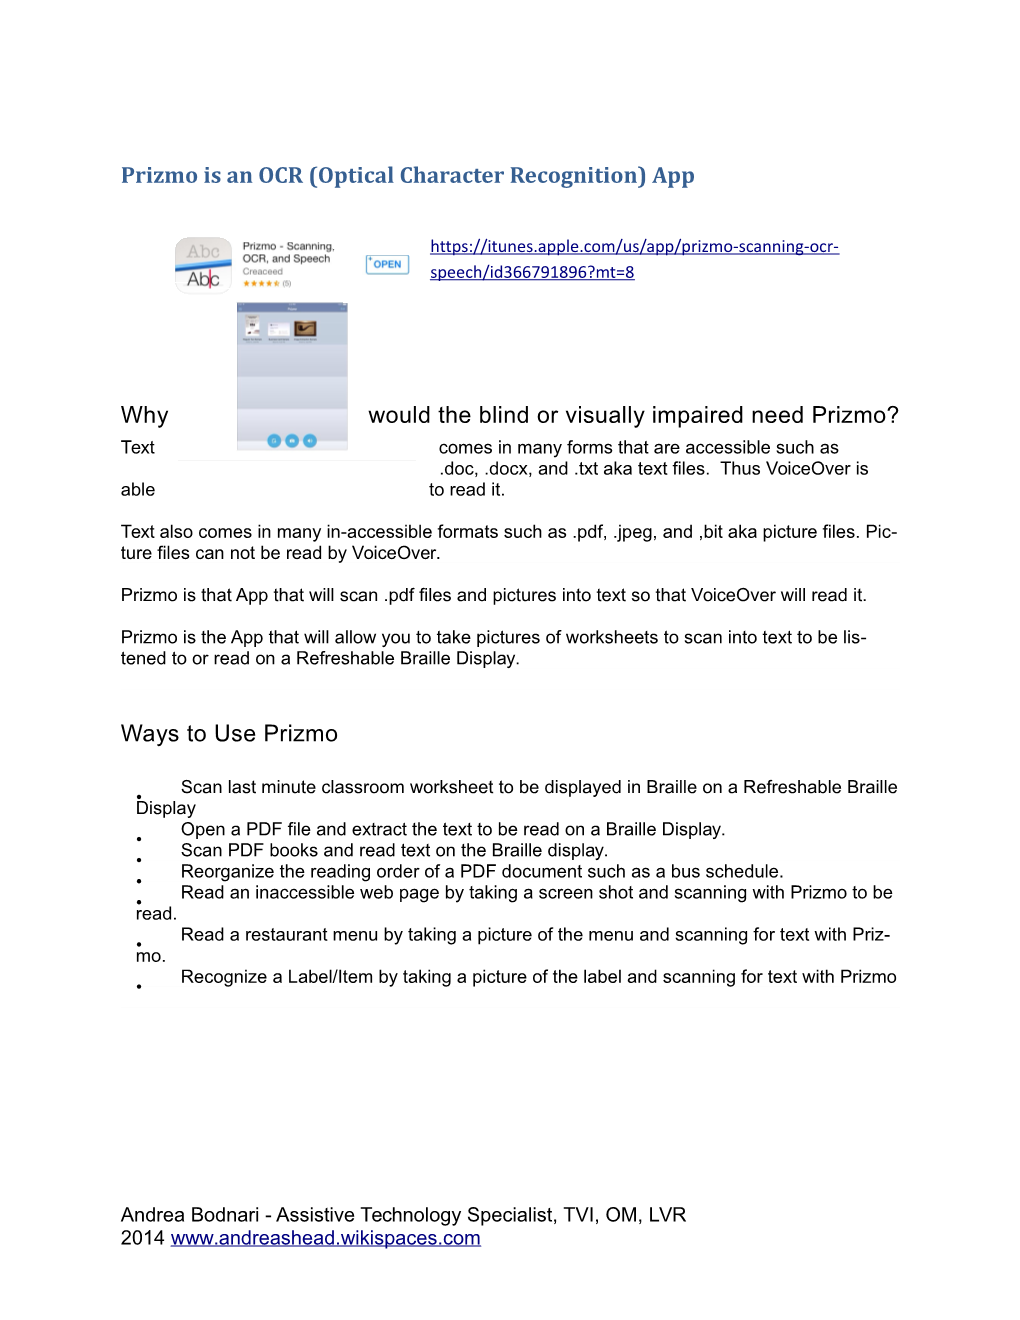 Prizmo Is an OCR (Optical Character Recognition) App